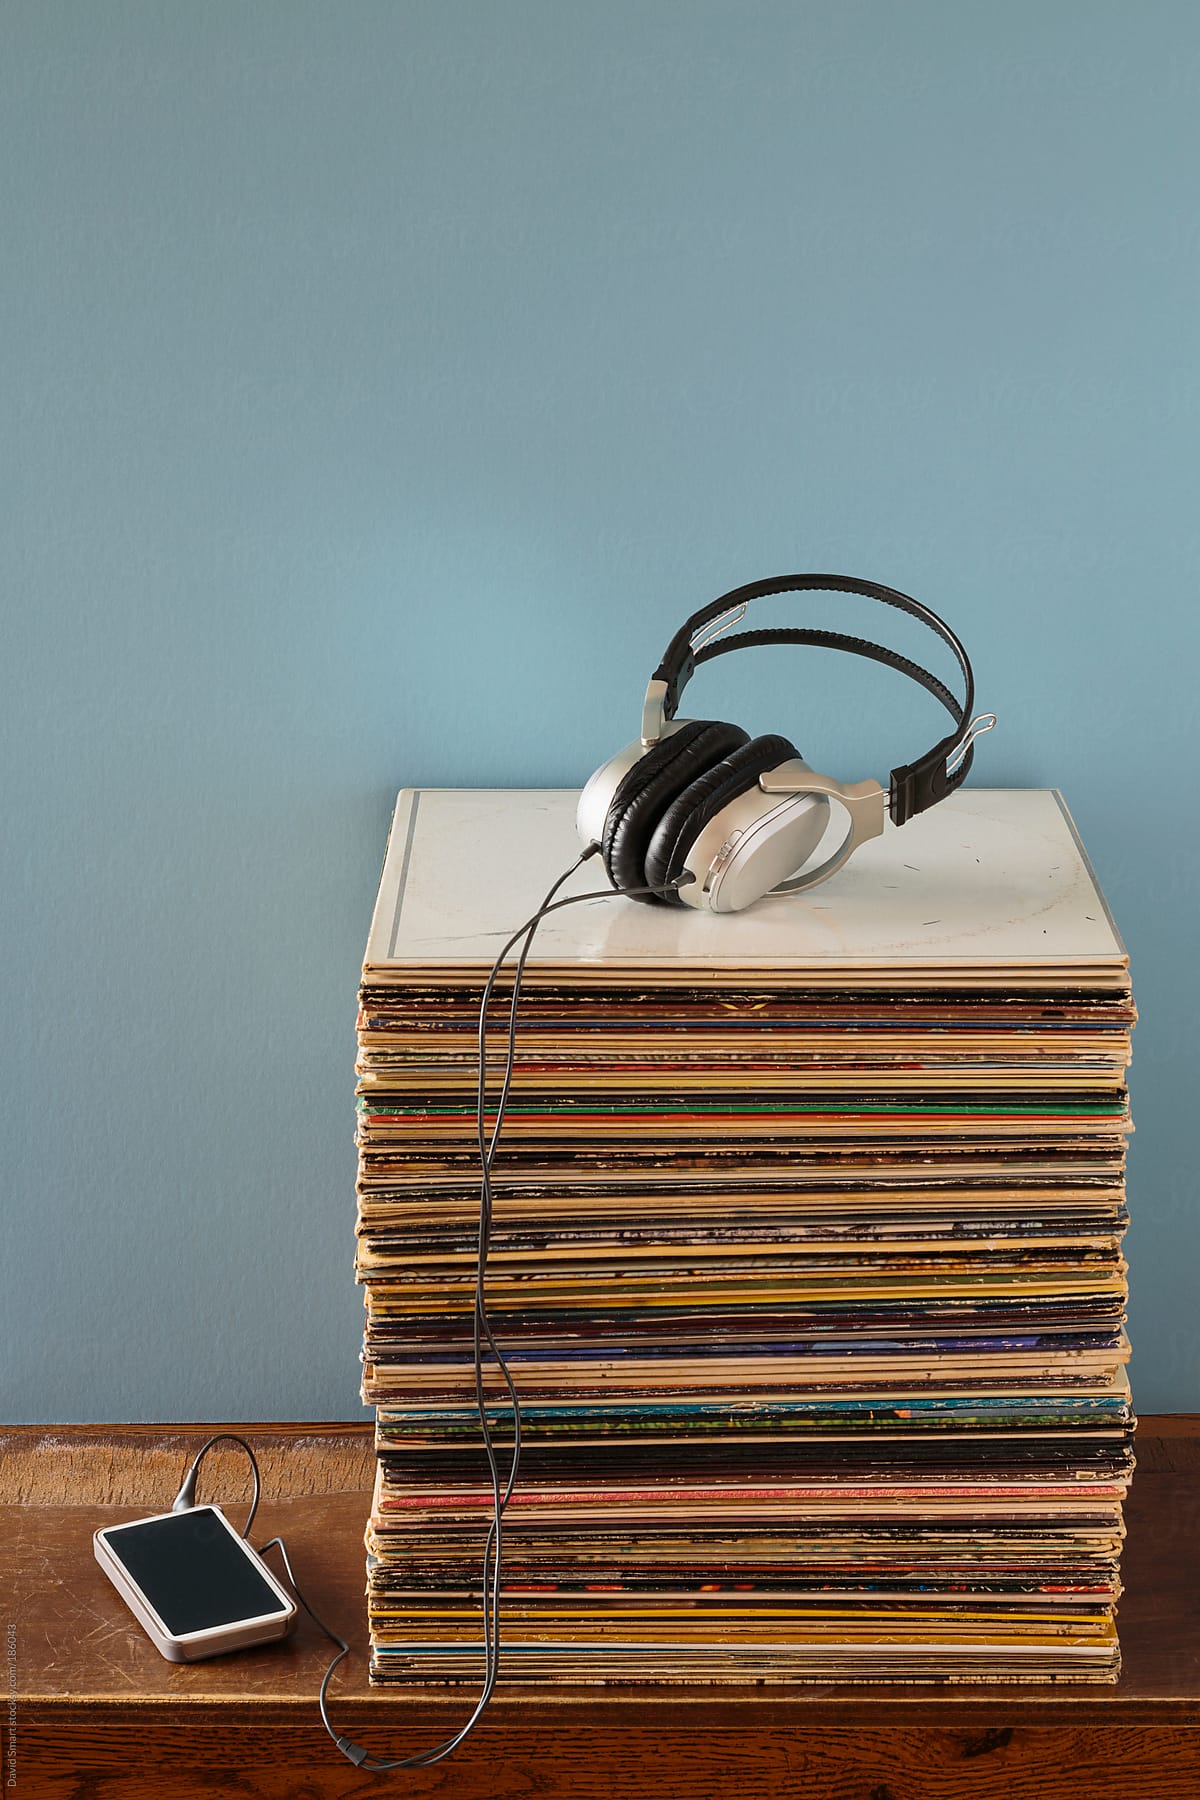 Vinyl record albums, headphones and a mobile phone